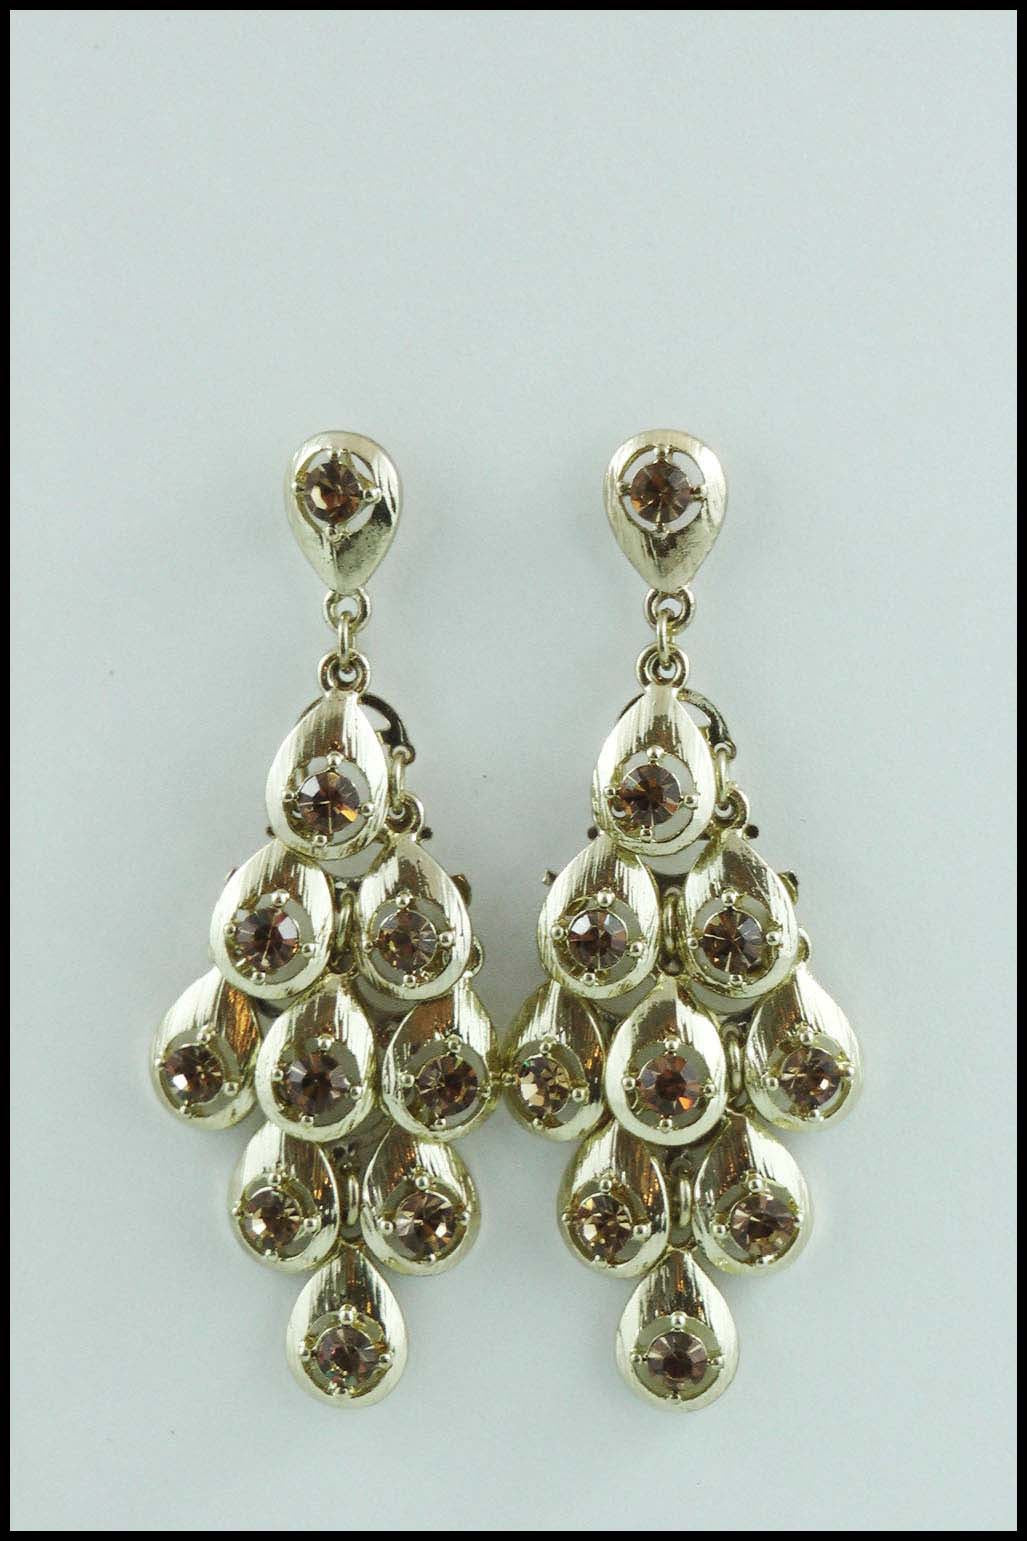 Chandelier Earrings With Gold Coloured Faux Crystals